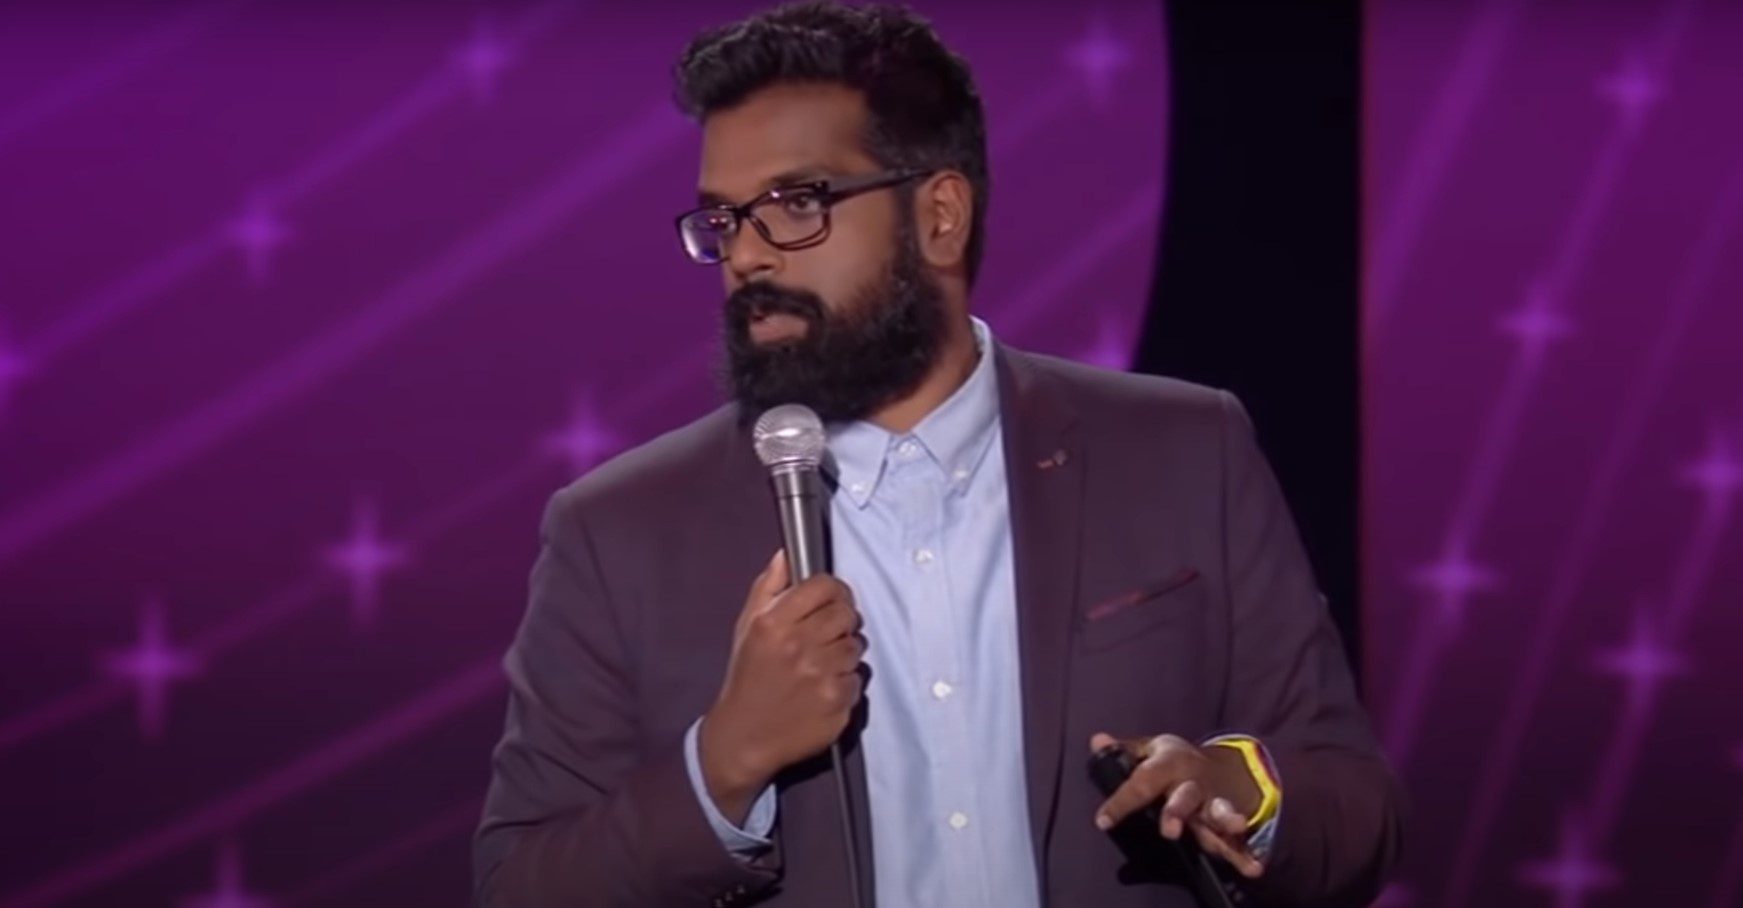 Investigation of Romesh Ranganathan's release date